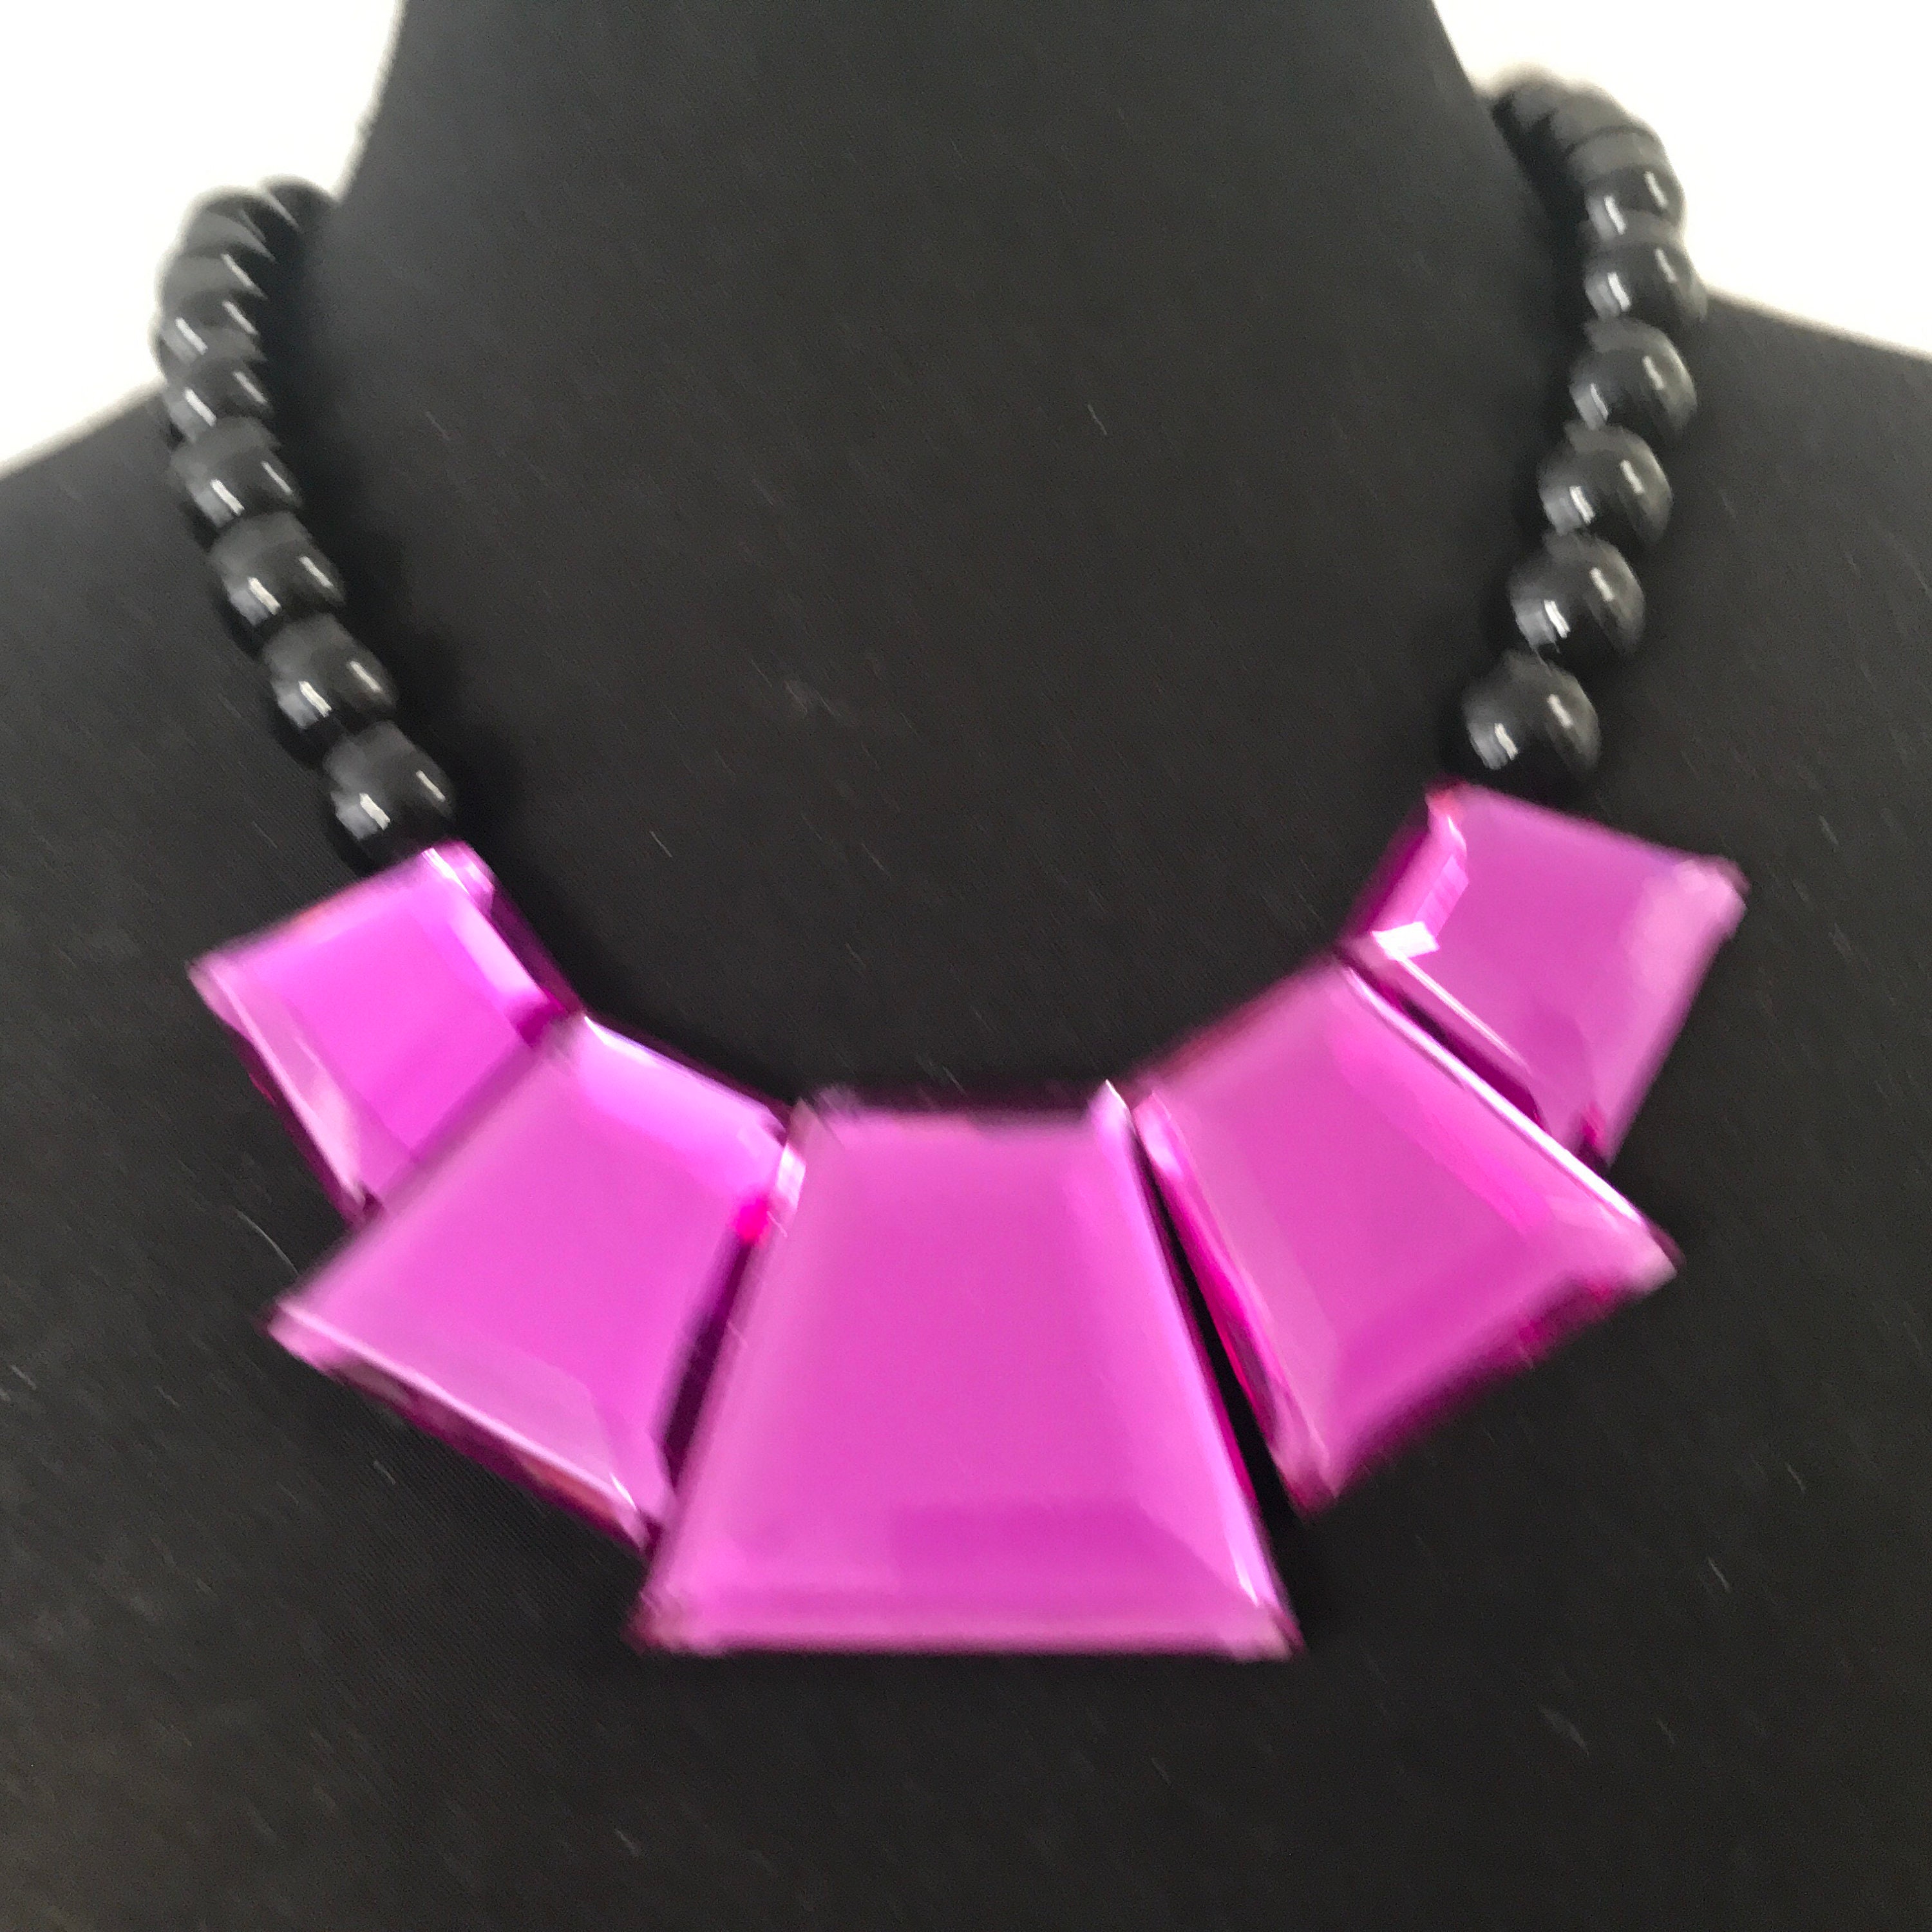 SILVER STATEMENT NECKLACE WITH PURPLE ANIMAL SKIN PRINT AND FACETED LUCITE BEADS 